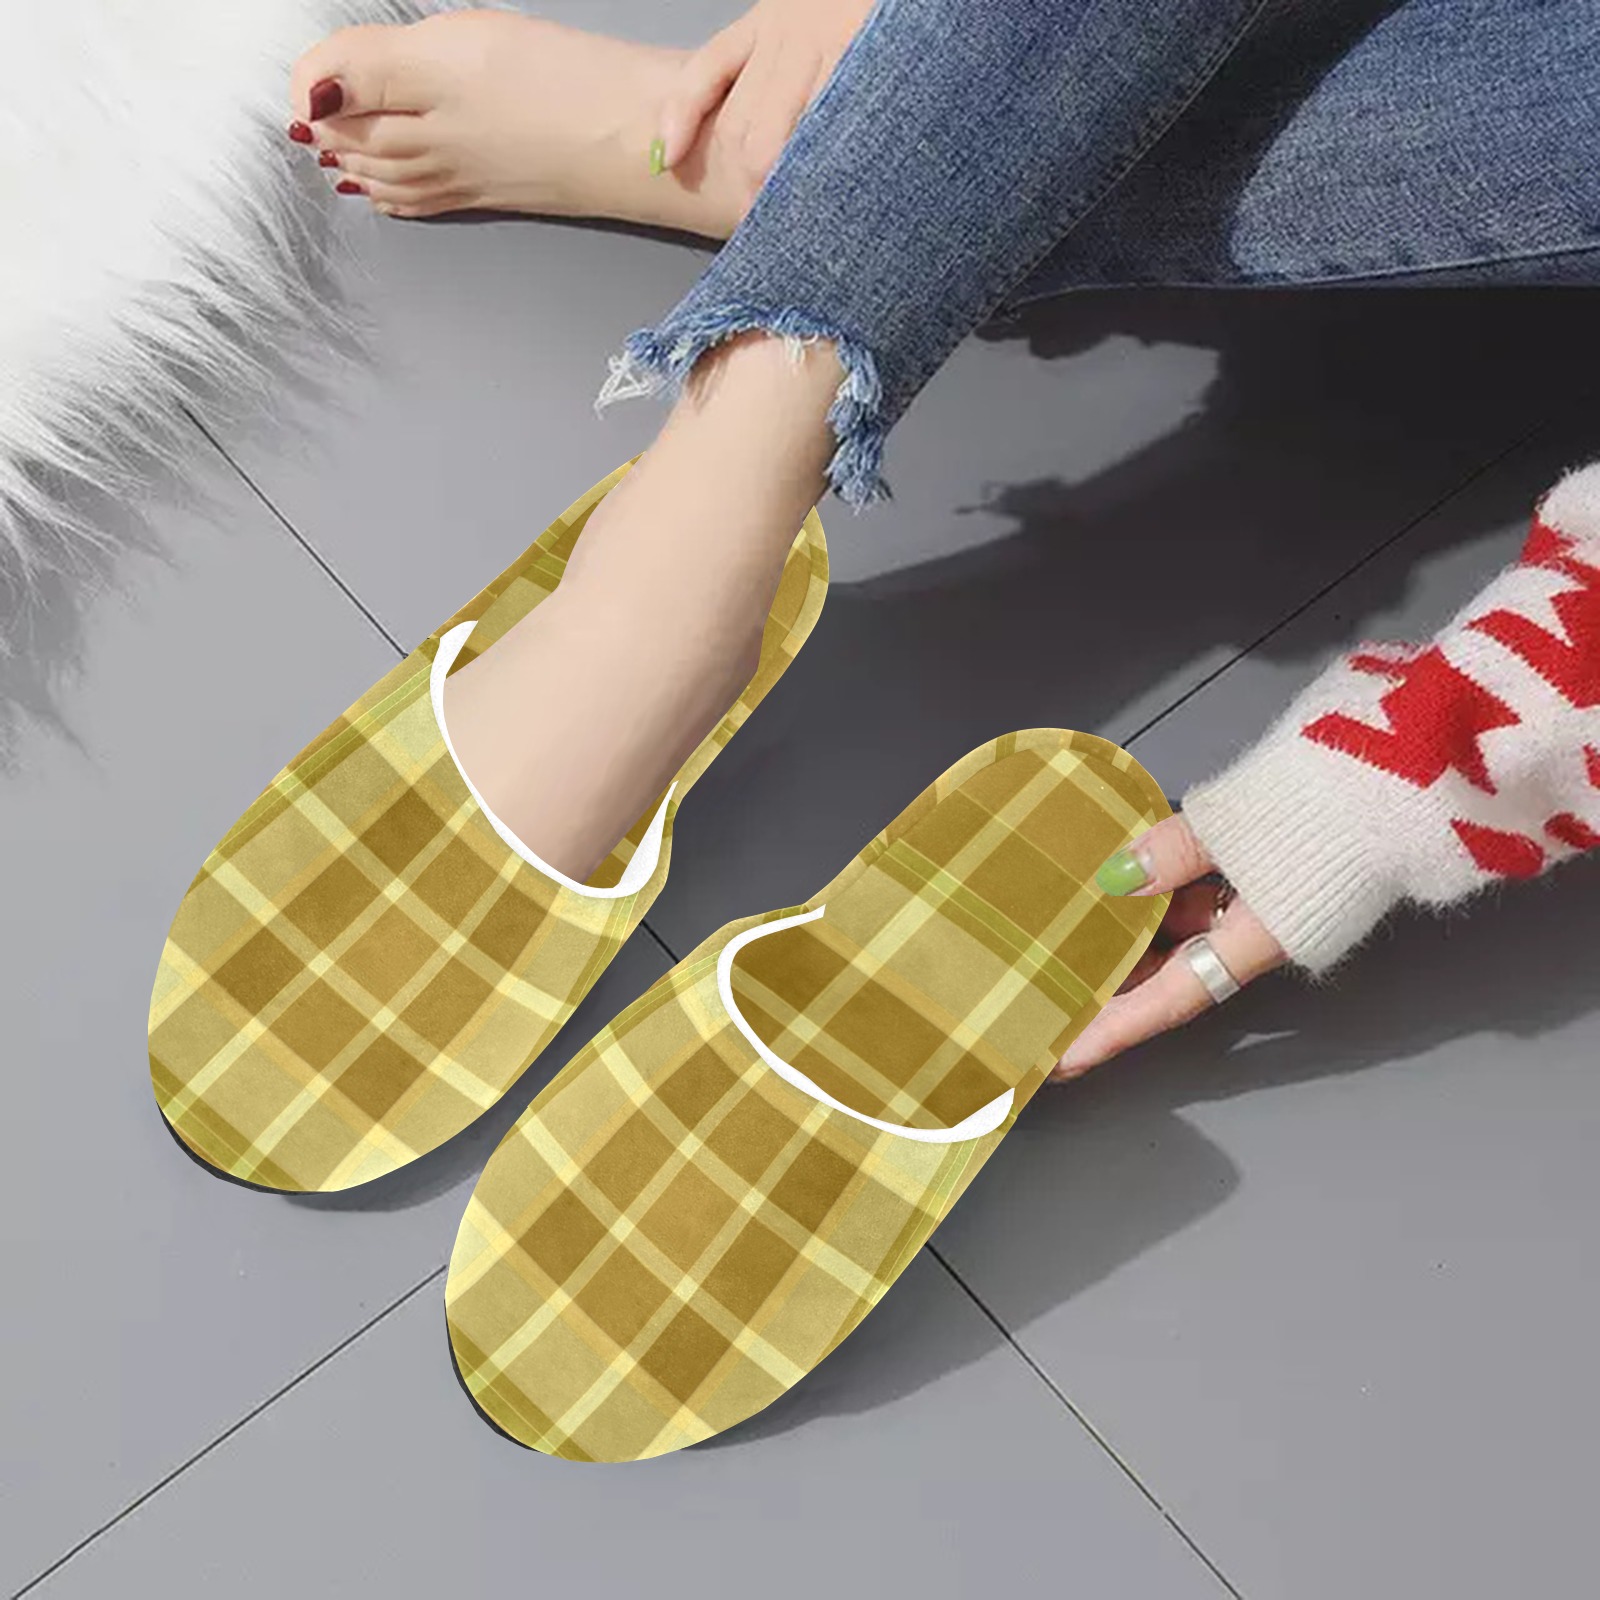 Shades Of Yellow Plaid Women's Cotton Slippers (Model 0601)